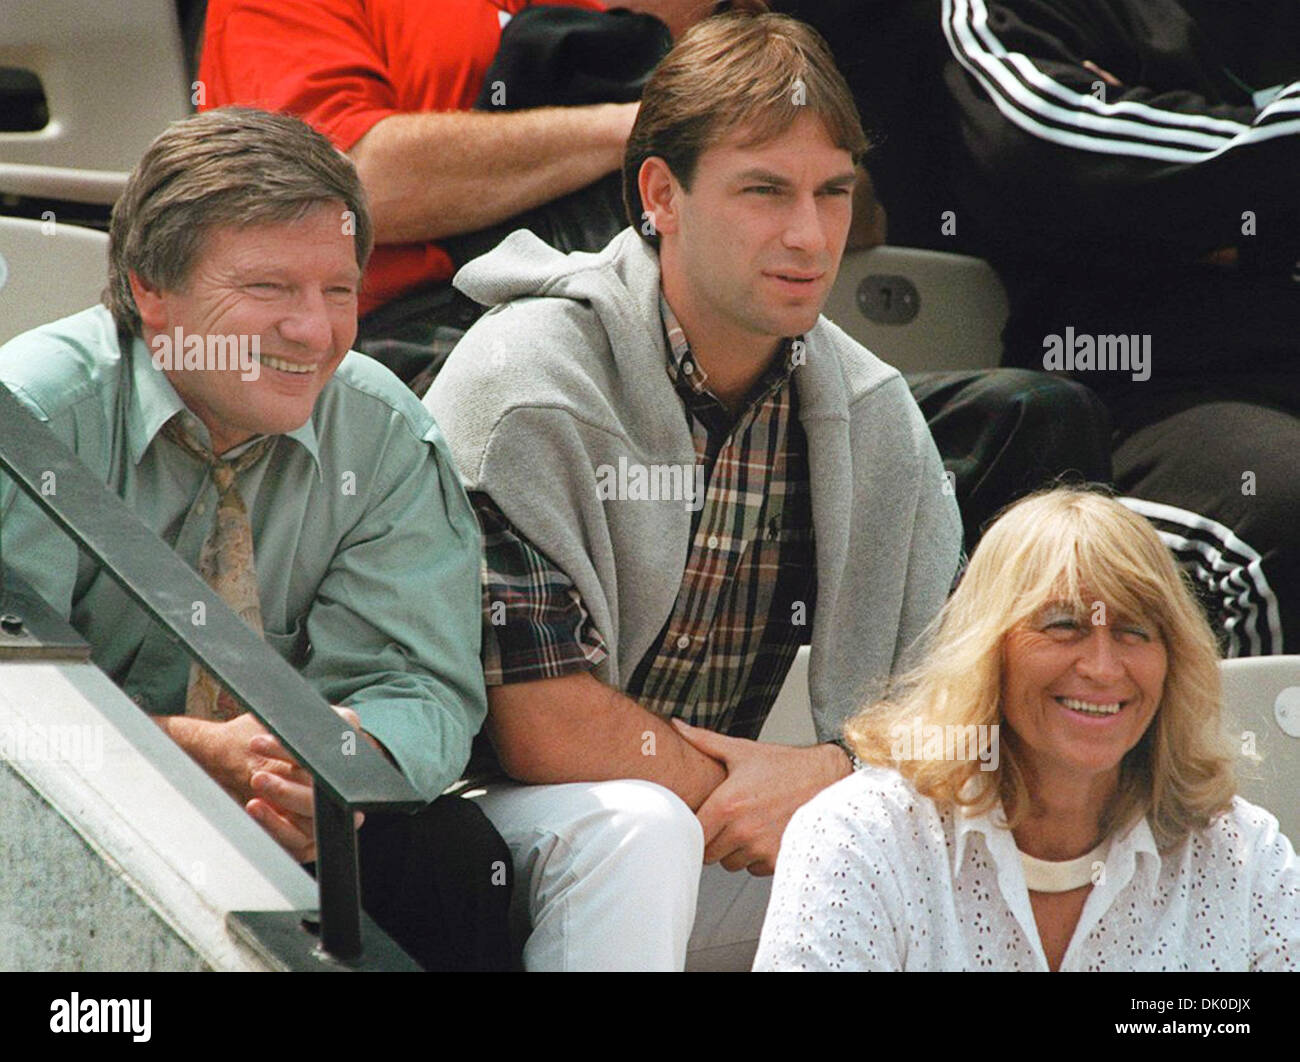 FILE) The file photo dated 06 June 1995 shows Peter Graf, father of the  well-known tennis player Steffi Graf, with Steffi's boyfriend of the period  Michael Bartels and mother Heidi in the